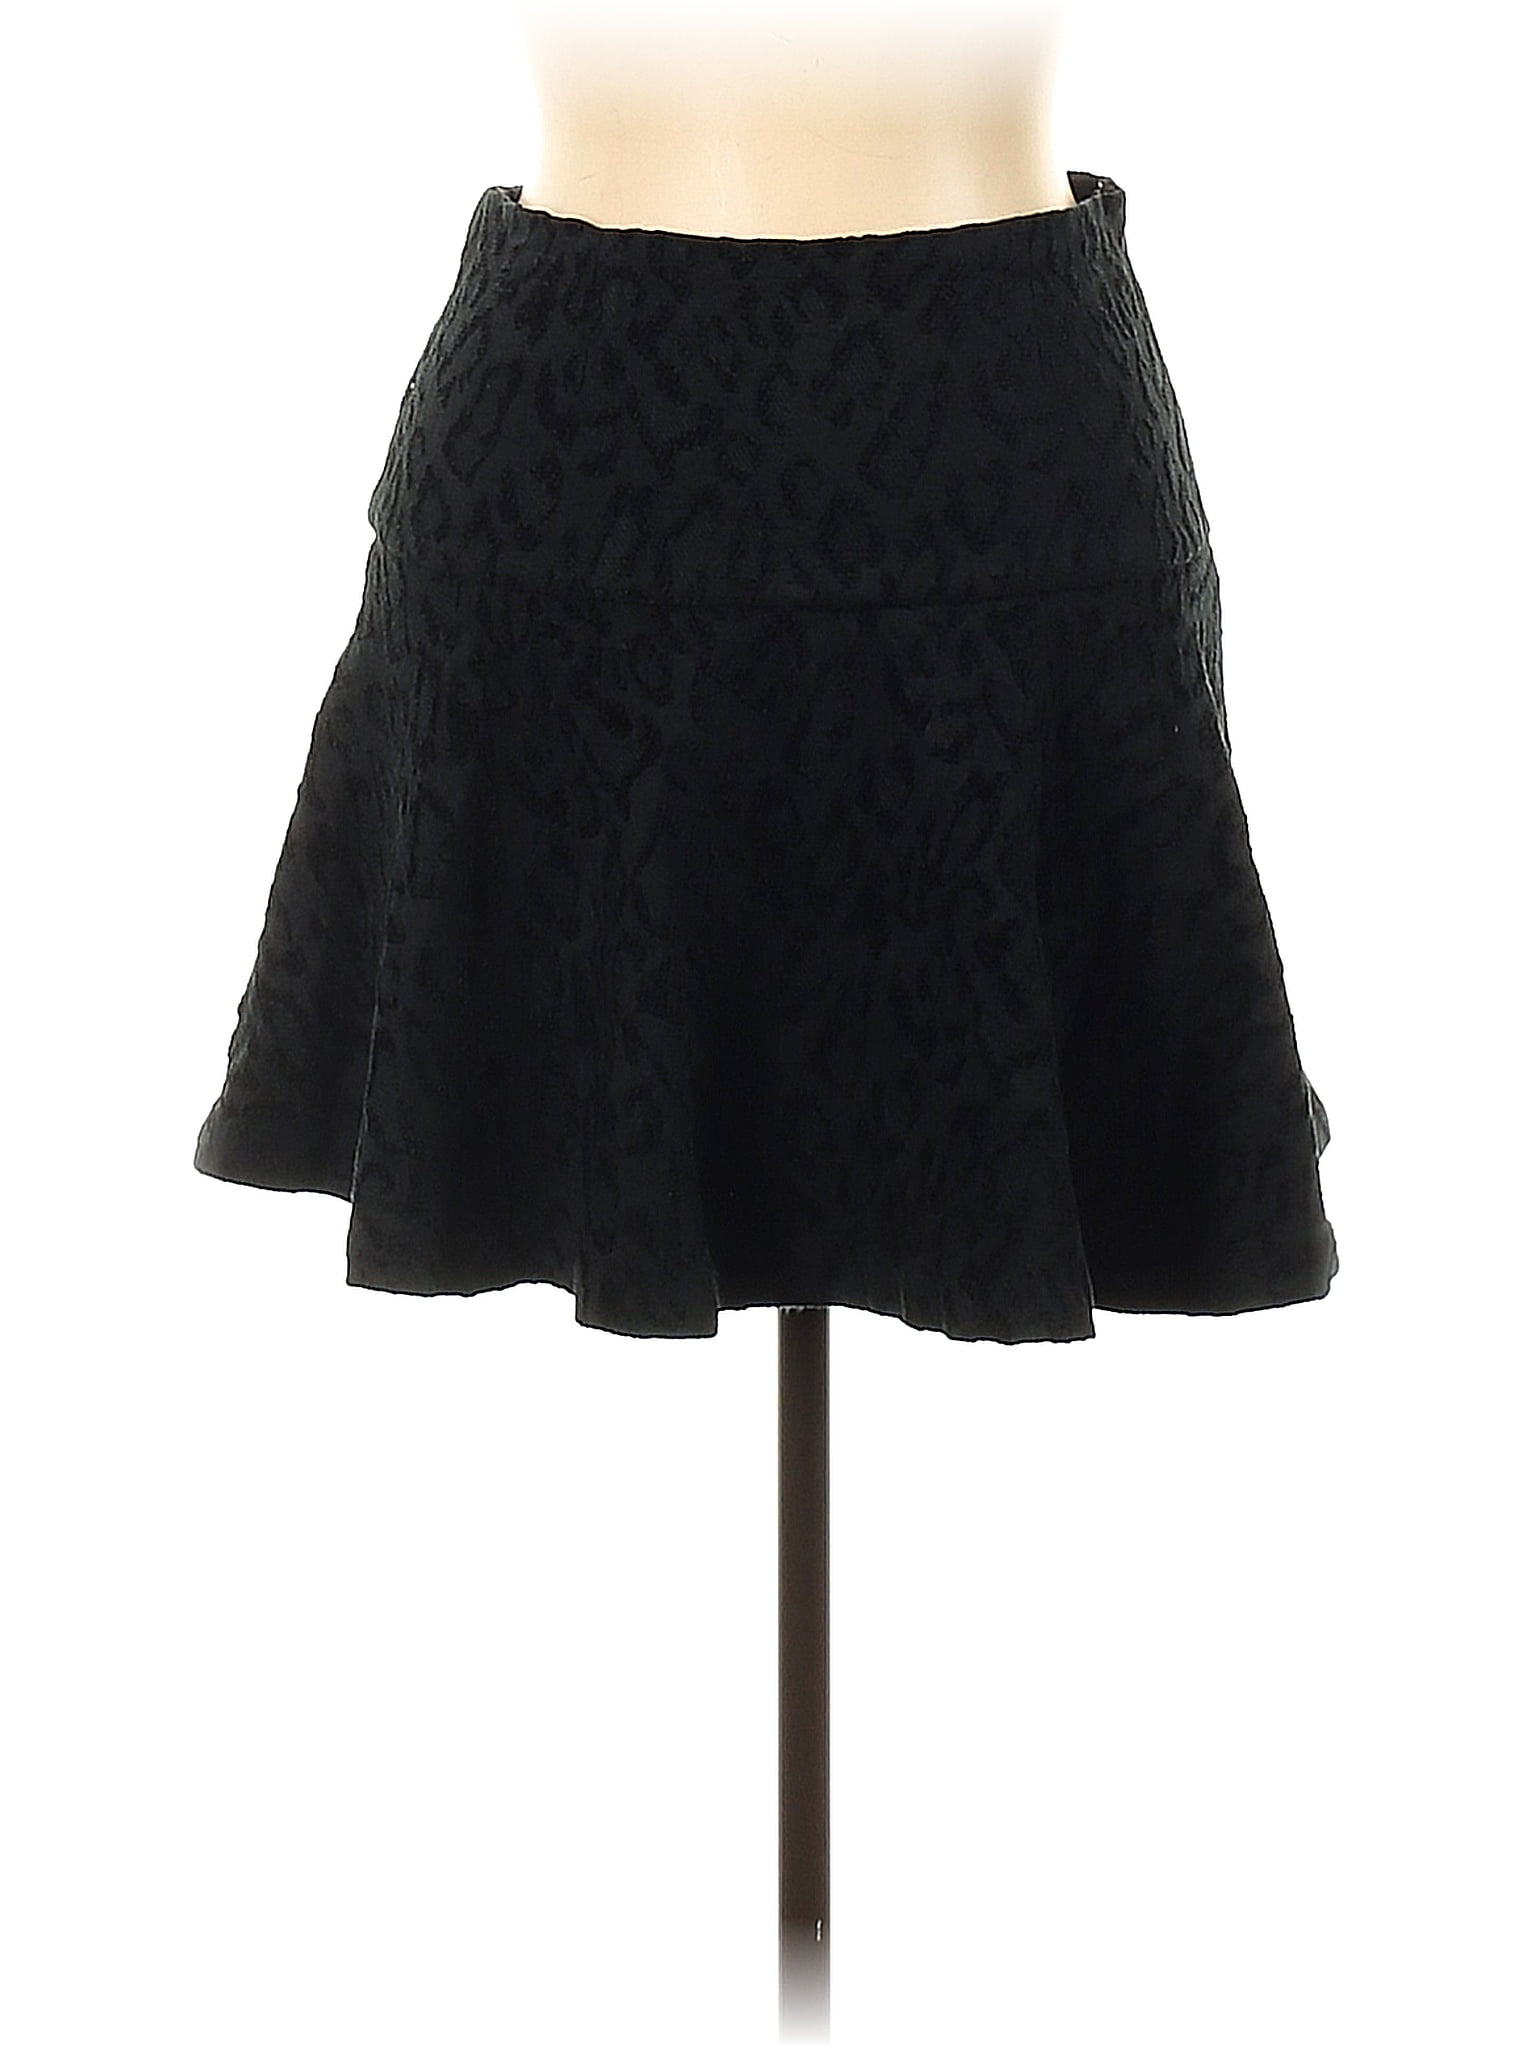 Free People Black Casual Skirt Size 8 - 71% off | thredUP